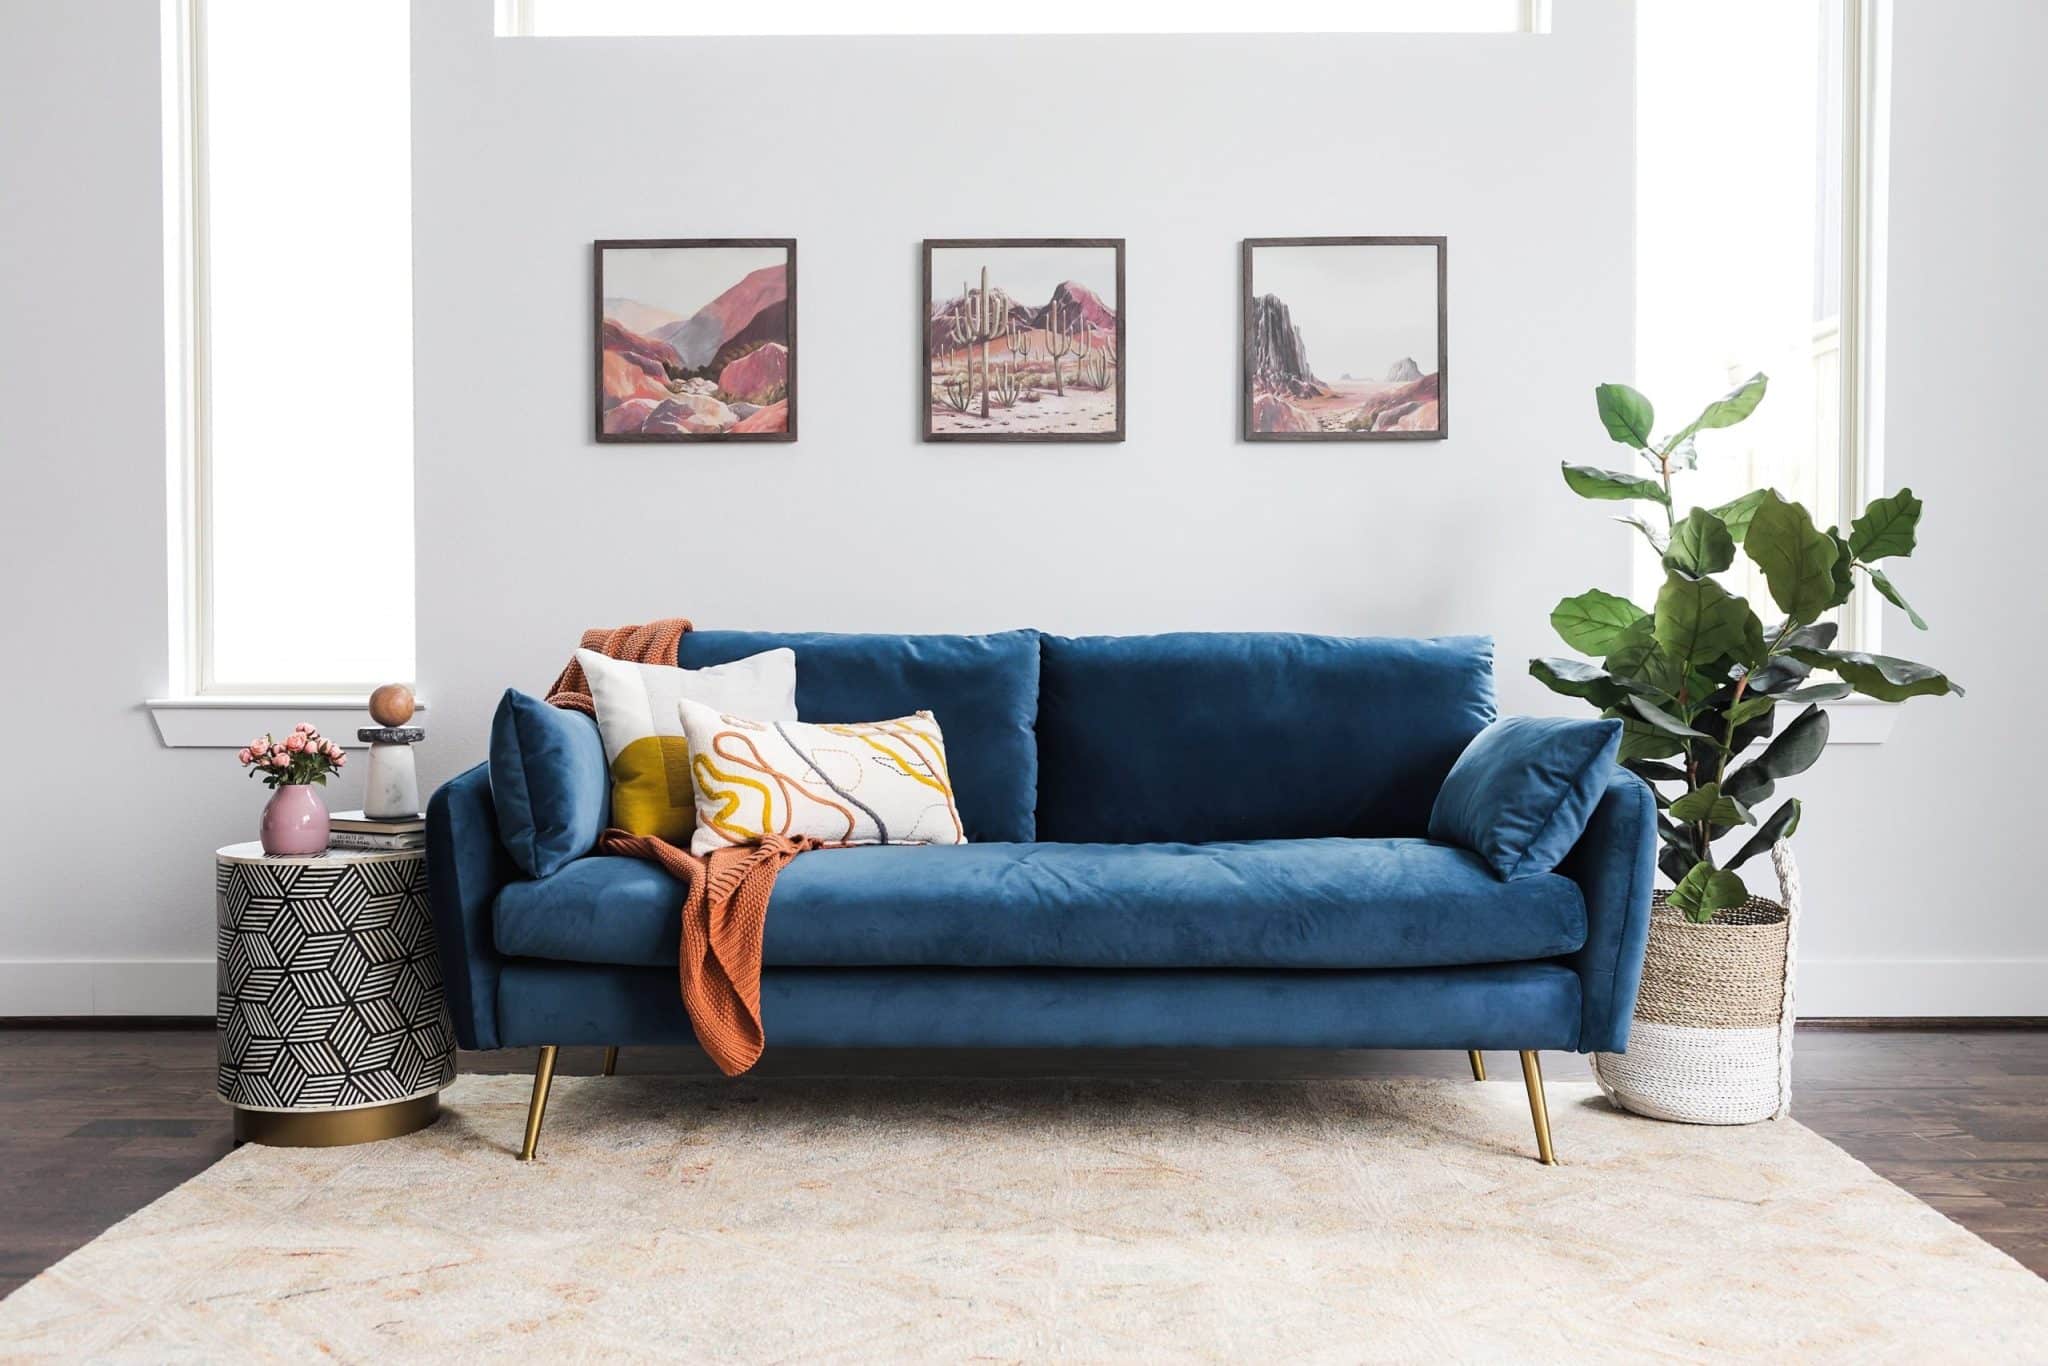 Can a blue velvet sofa be paired with other velvet furniture or decor in the room